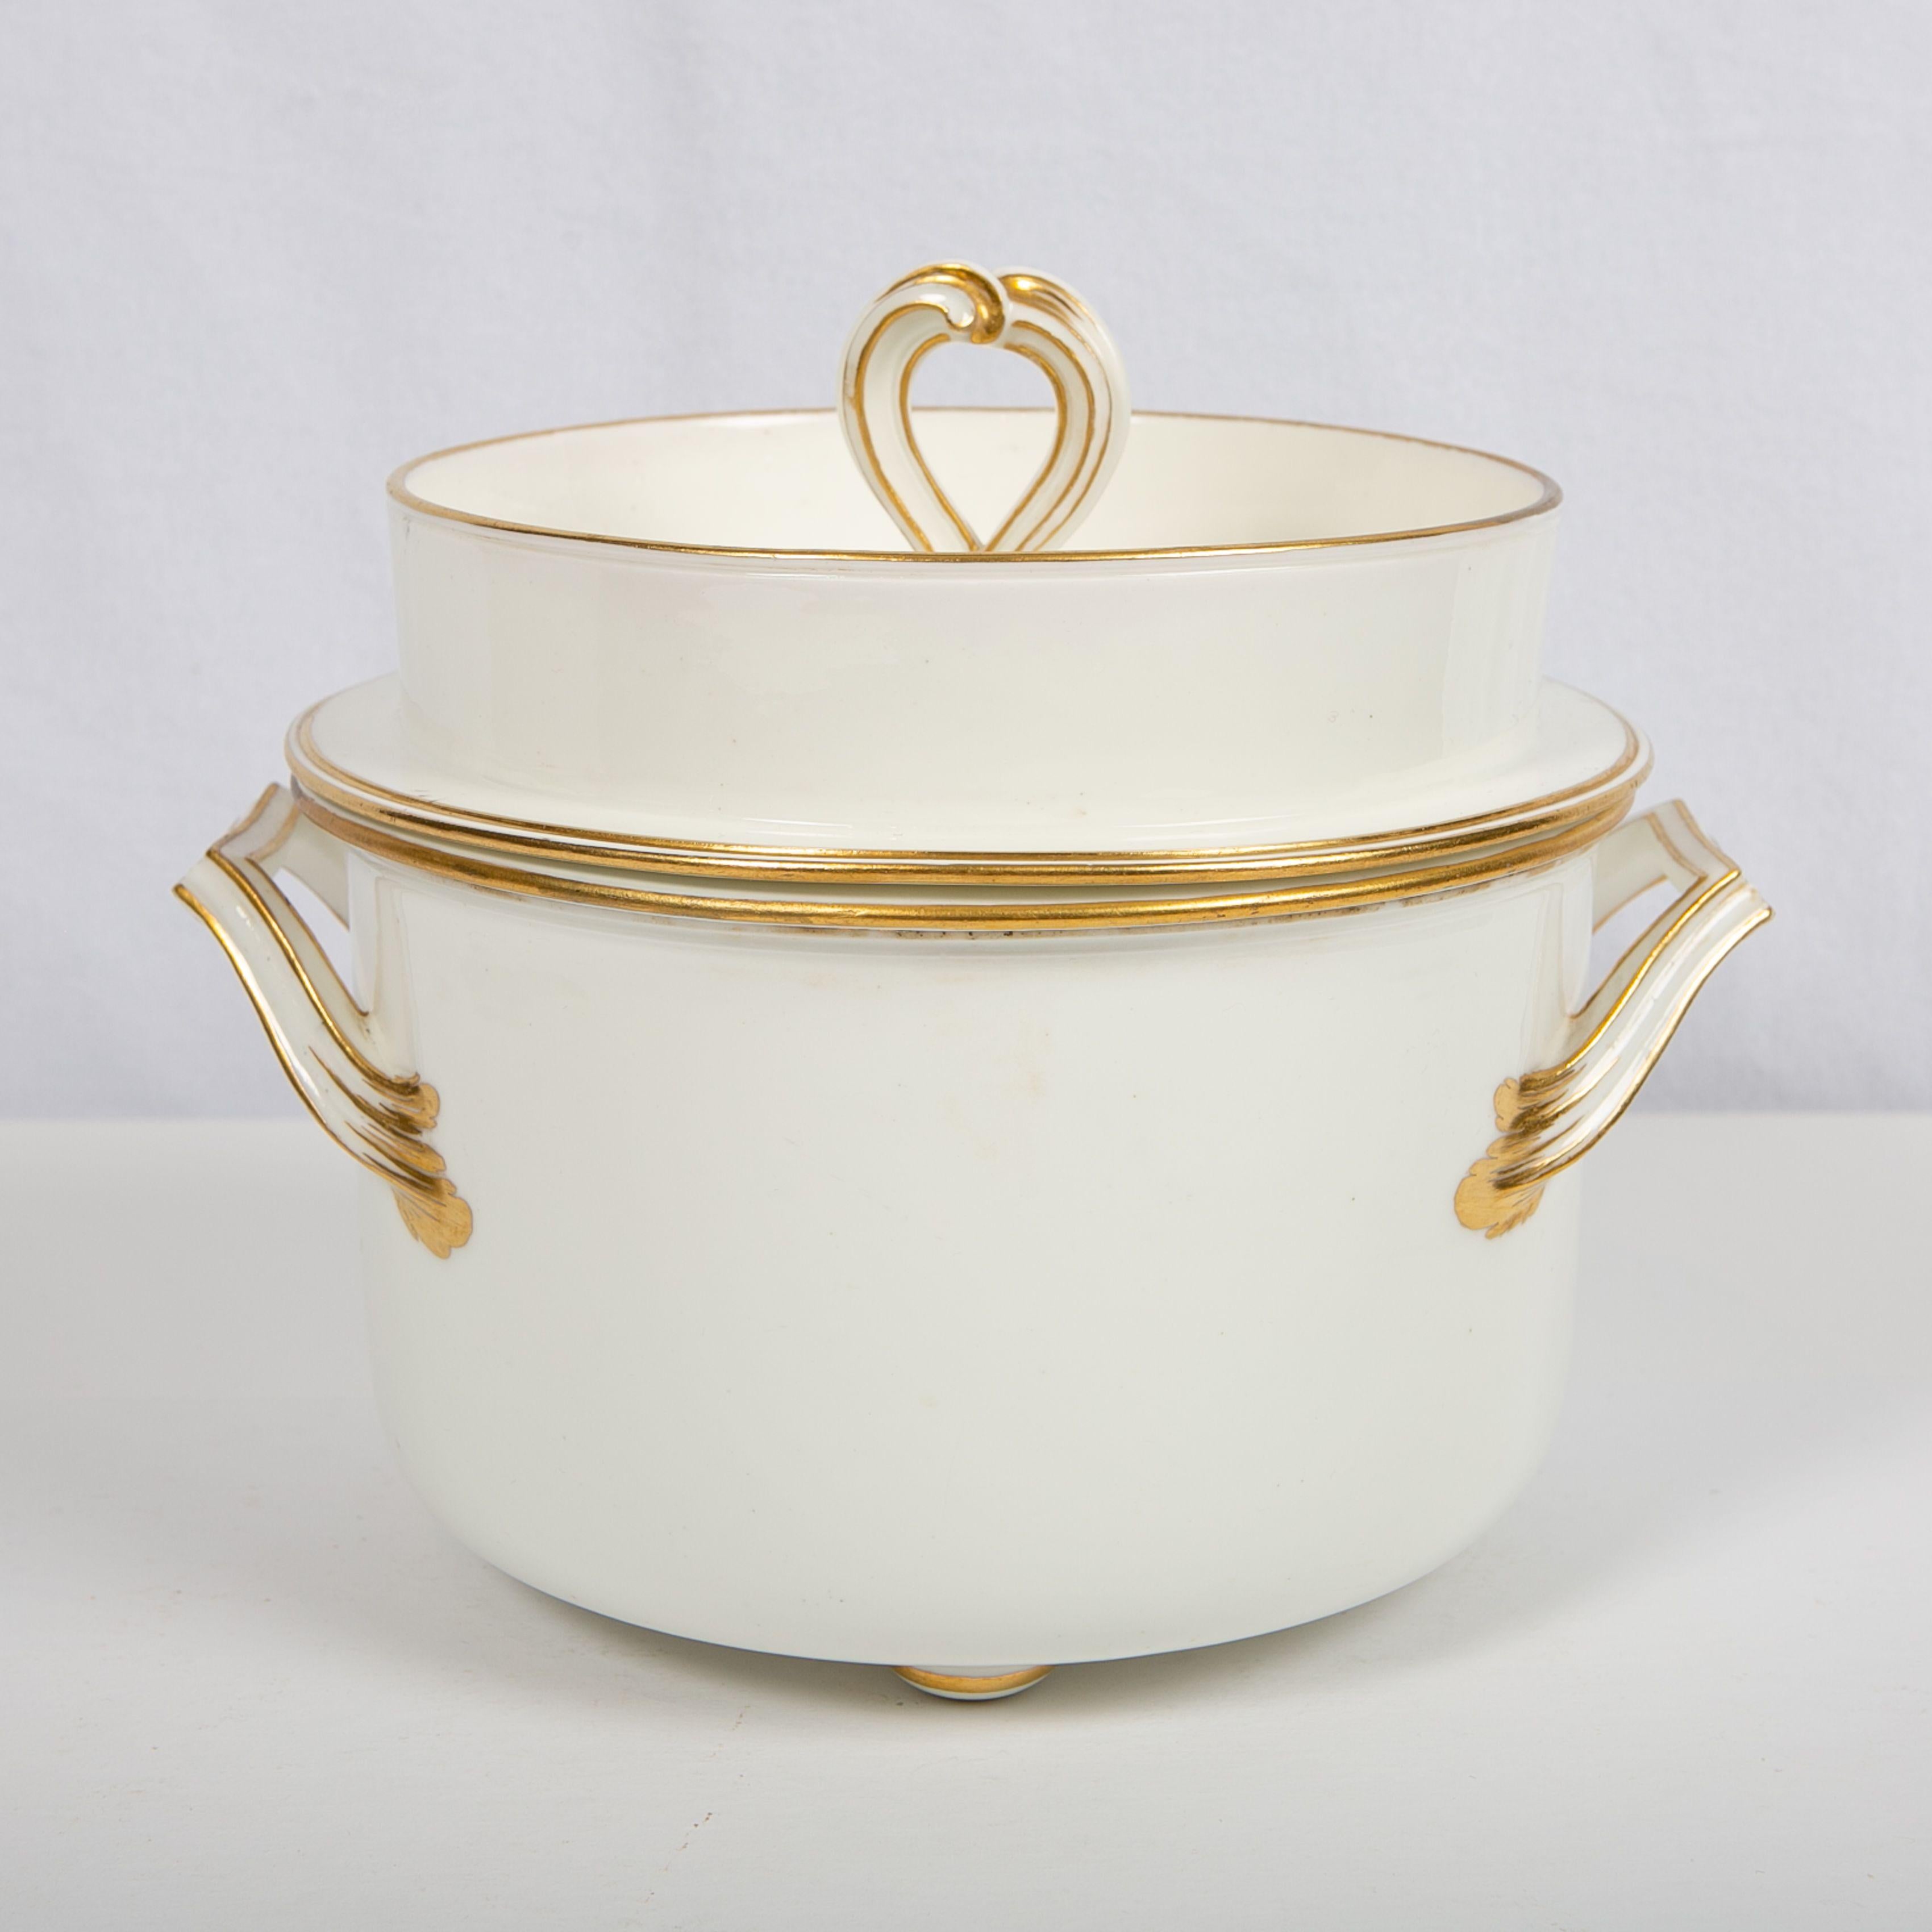 WHY WE LOVE IT: Everyone loves iced cream!
This English porcelain ice pail, also known as an iced cream-fruit cooler, was made in England by William Billingsly circa 1810.
The white porcelain has a beautiful, slightly creamy color. This was